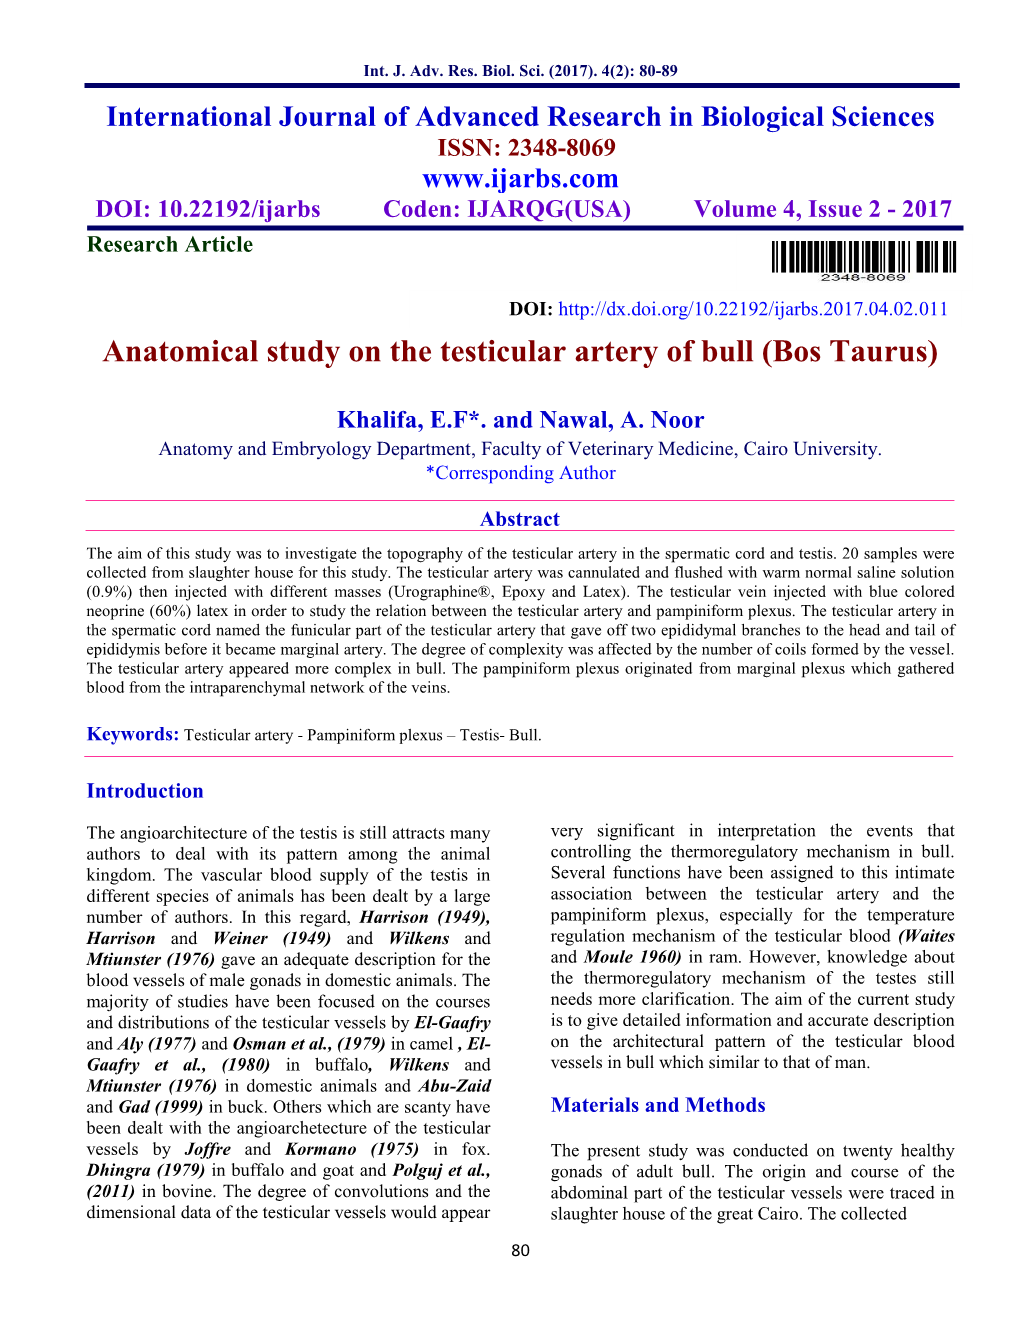 Anatomical Study on the Testicular Artery of Bull (Bos Taurus)